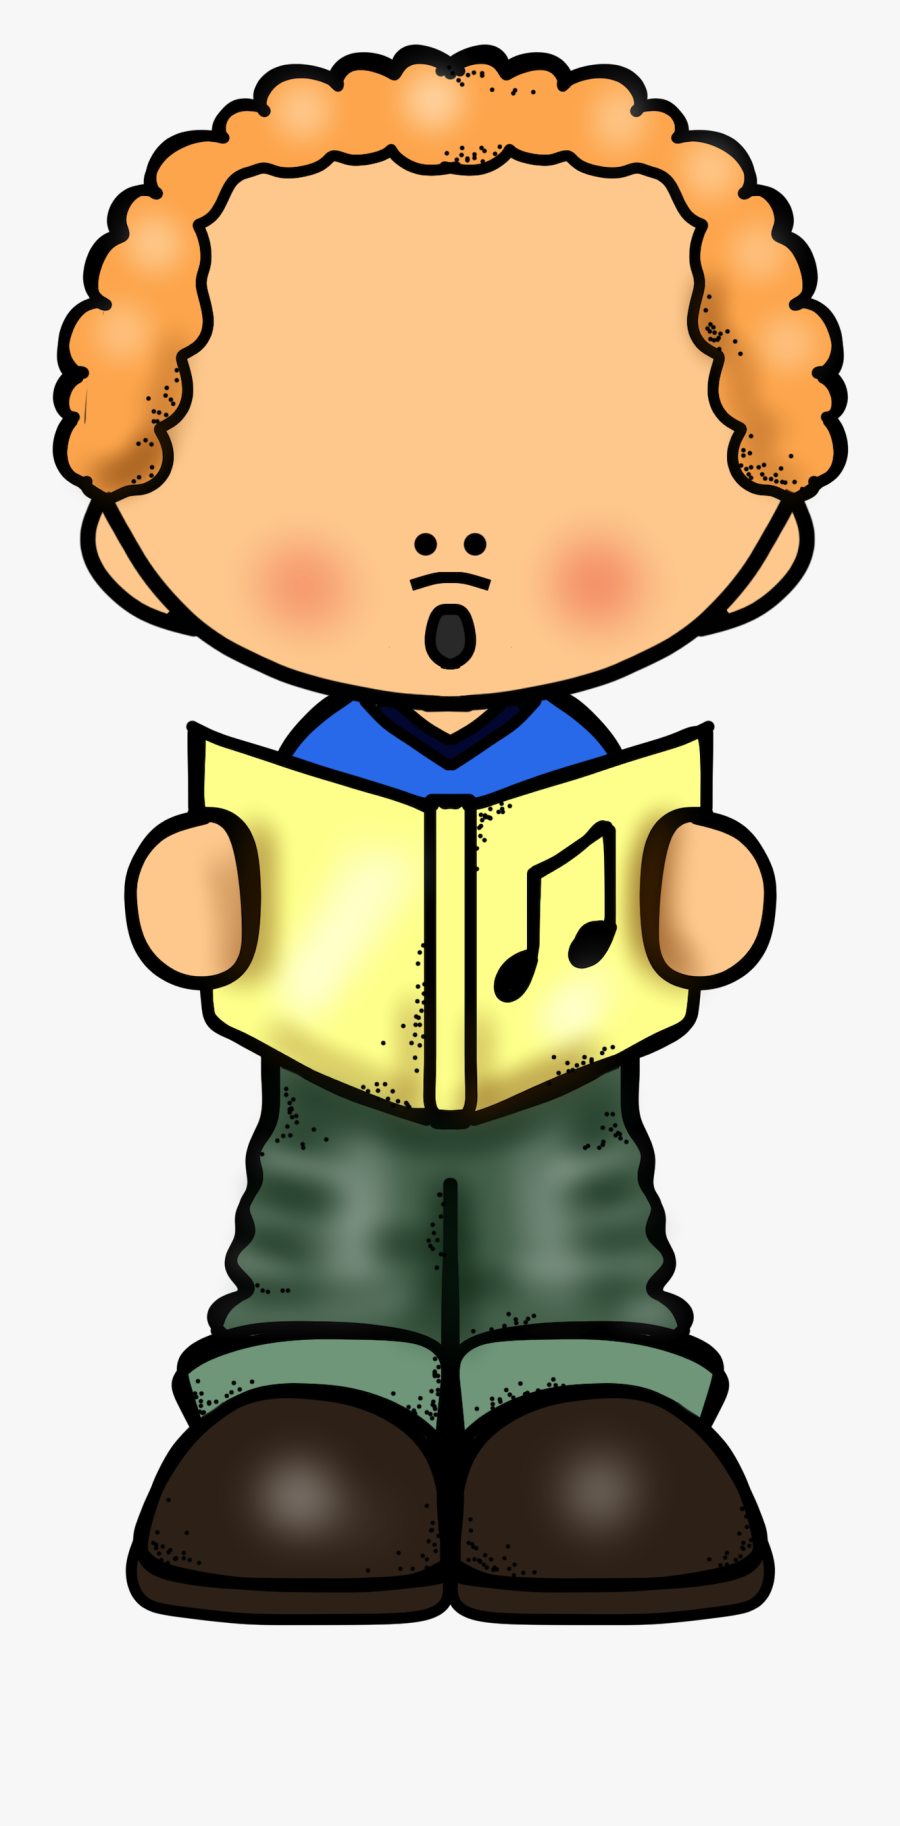 Music - My Face Template Printable, Transparent Clipart